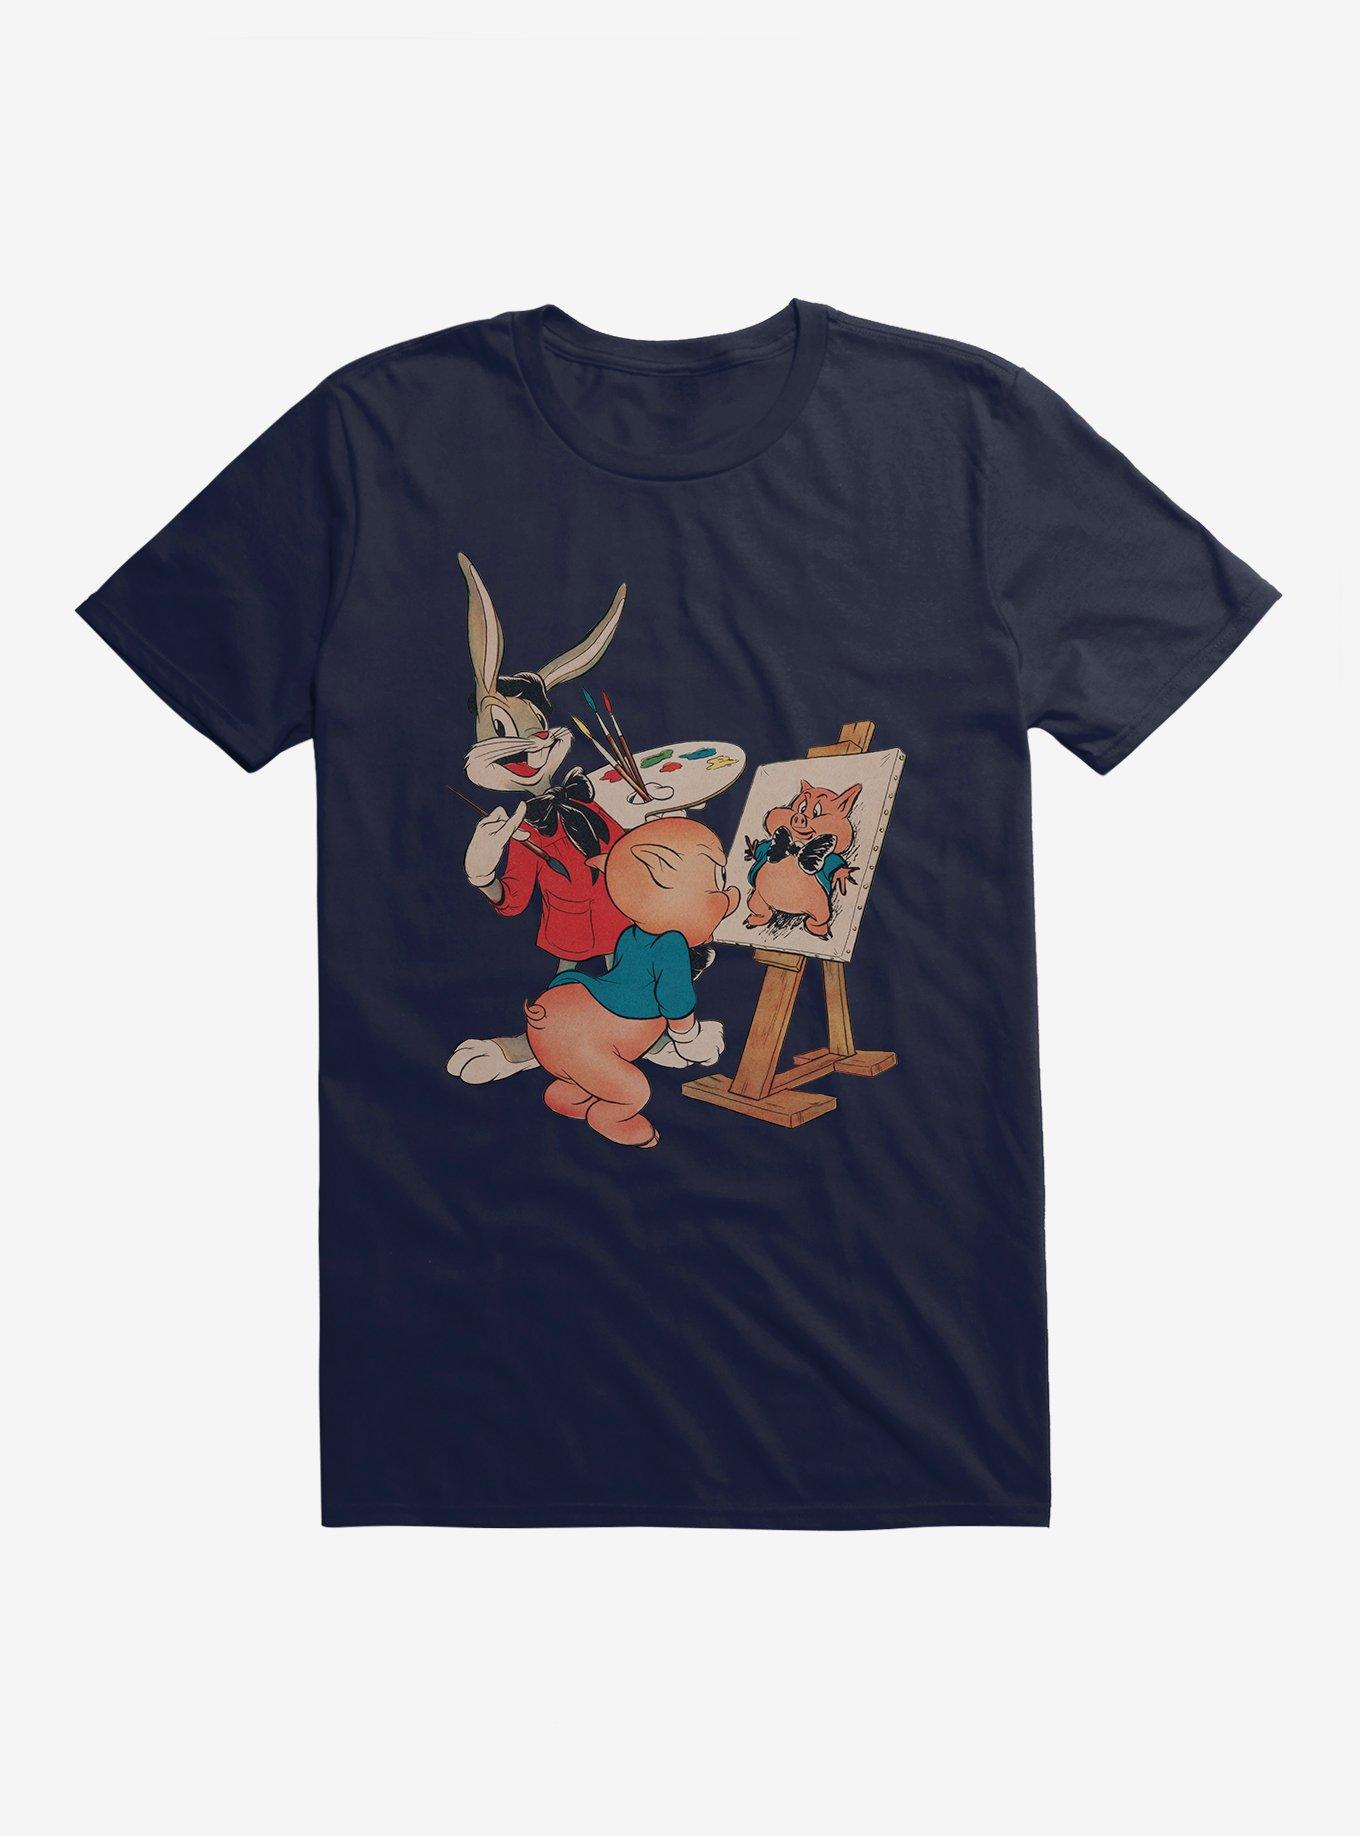 Looney Tunes Bugs Bunny And Porky Pig T-Shirt, NAVY, hi-res